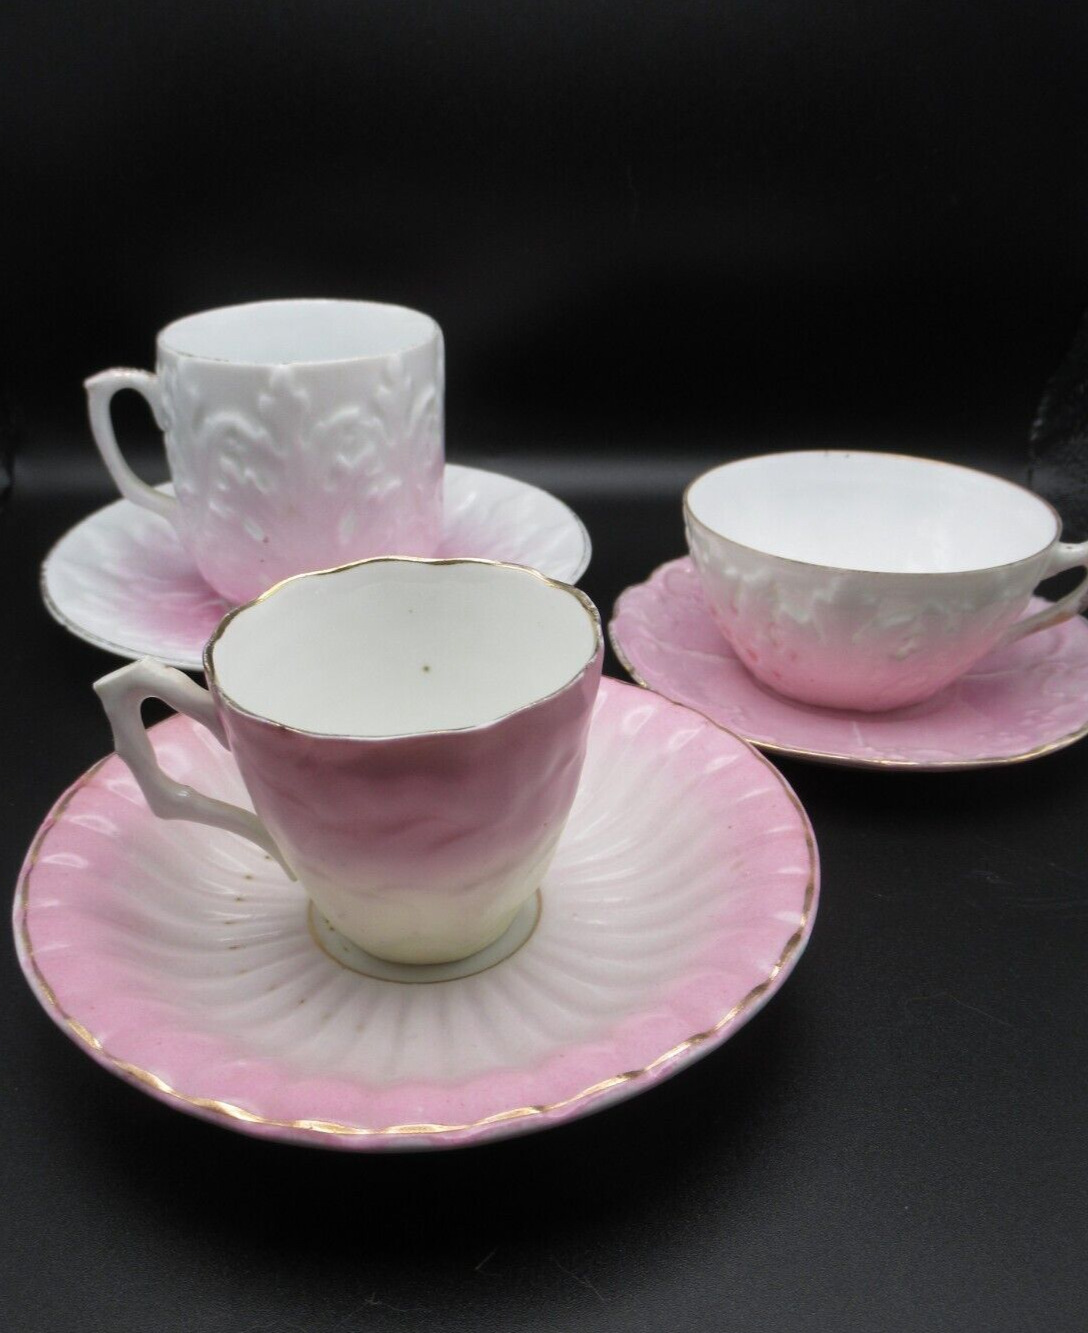 Antique lot 3 cup saucers pink white gold accents repousse Germany dainty thin